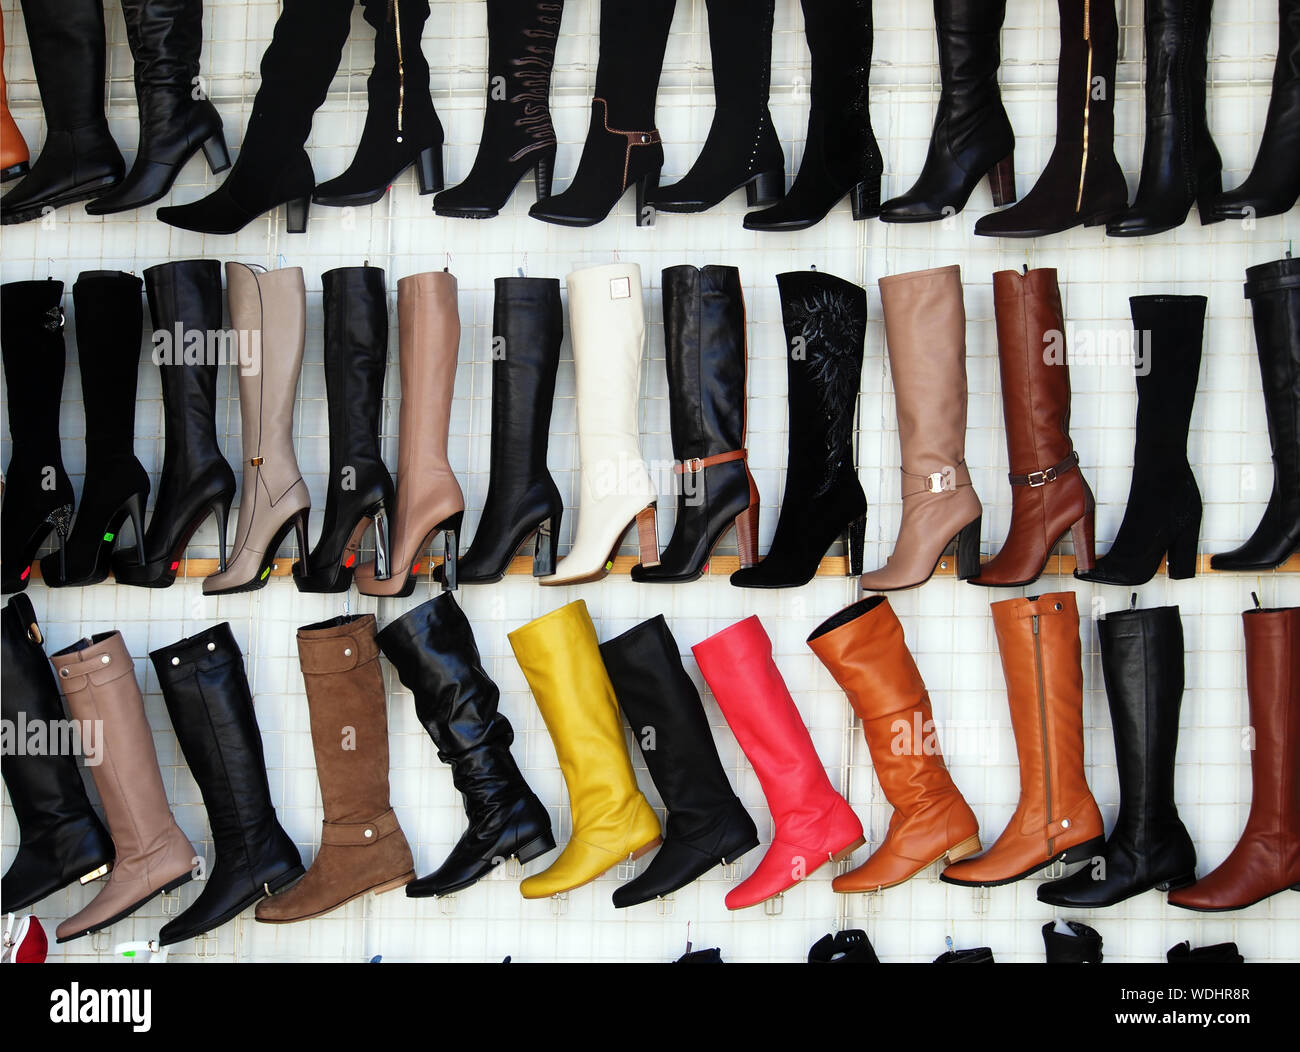 Boots For Sale High Resolution Stock Photography and Images - Alamy